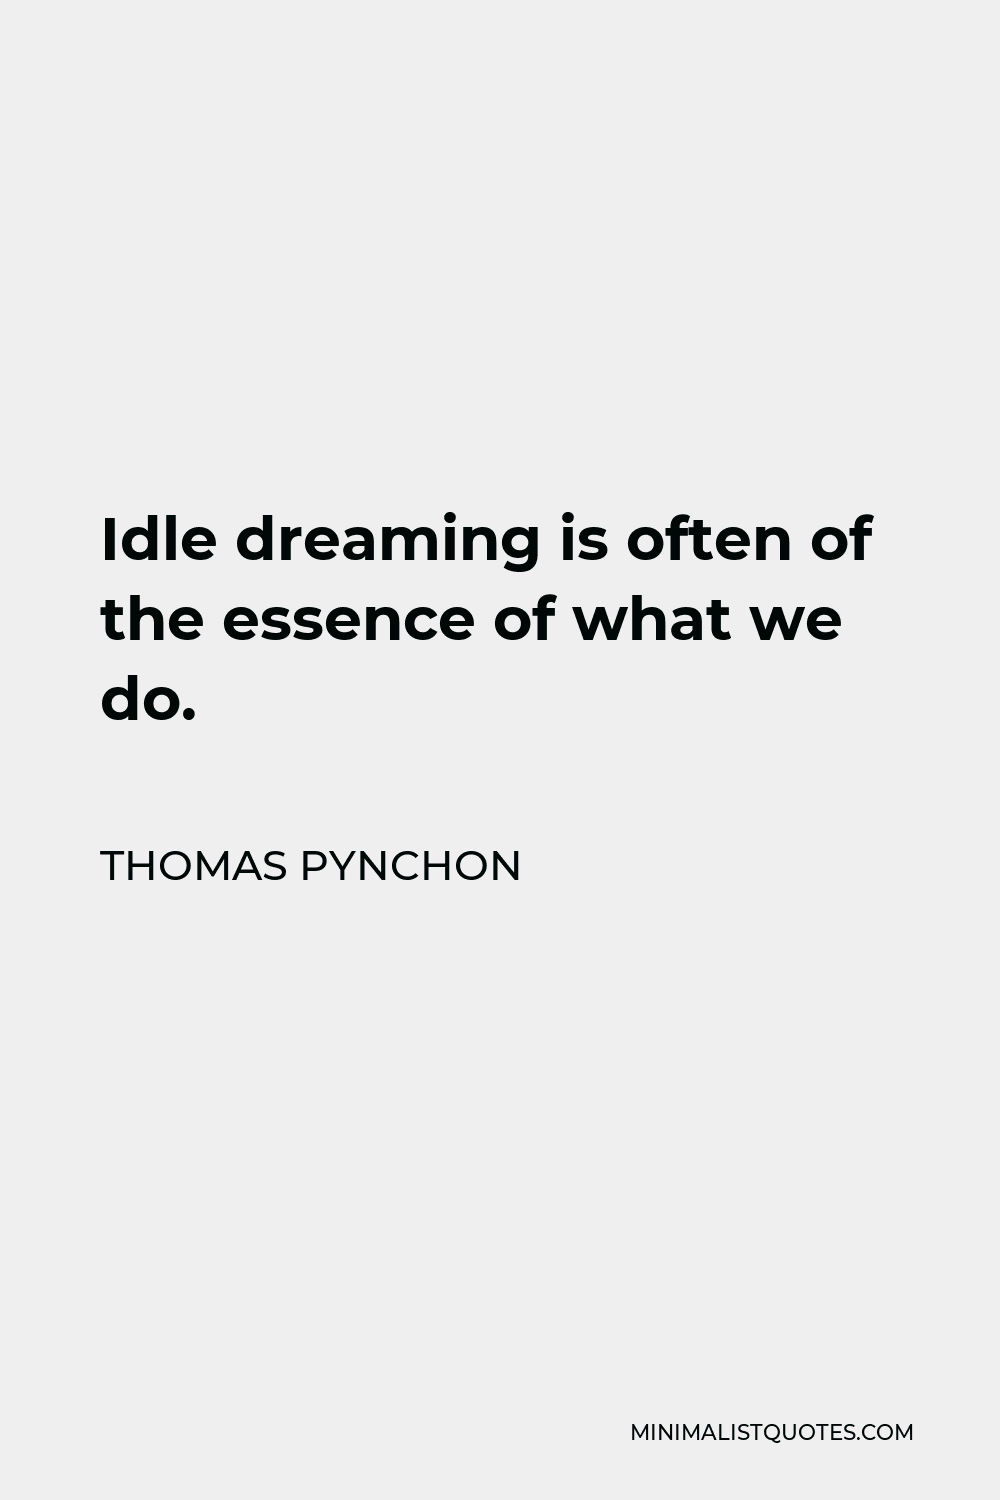 Thomas Pynchon Quote - Idle dreaming is often of the essence of what we do.